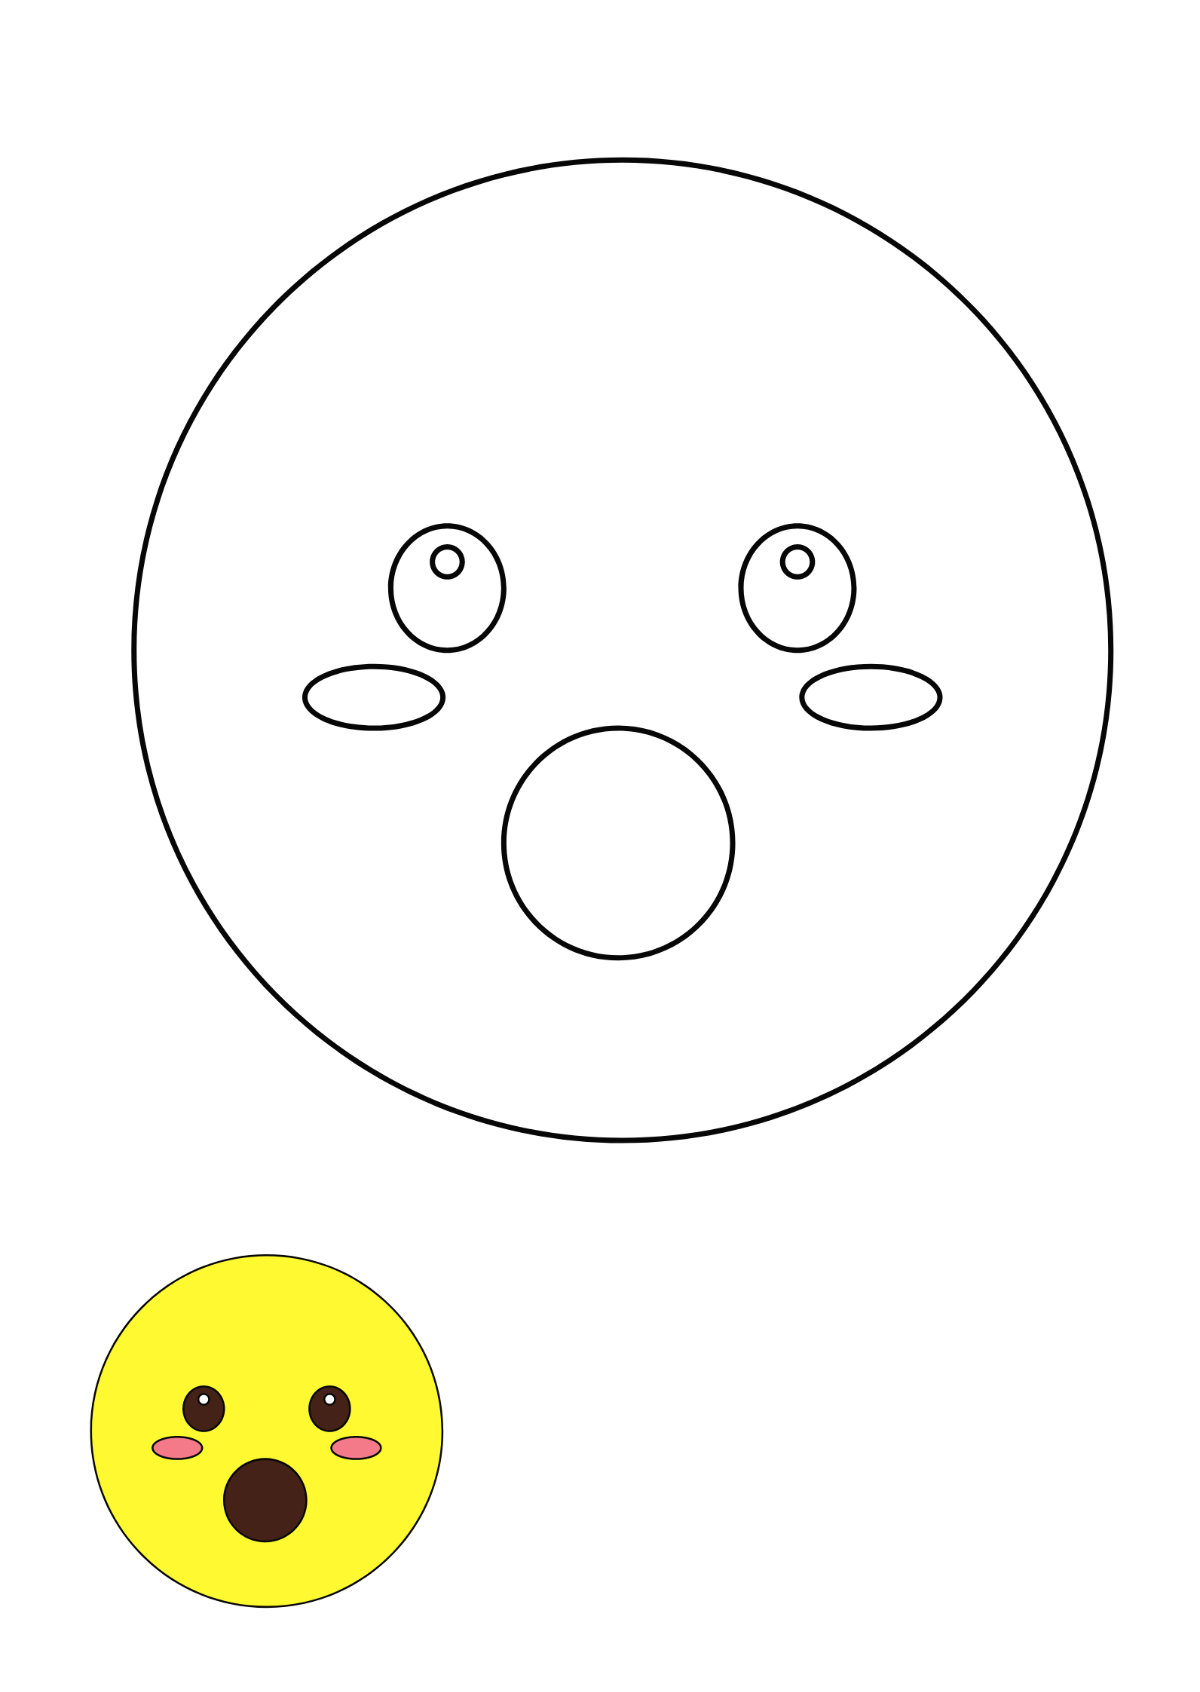 Surprised Smiley coloring page Template